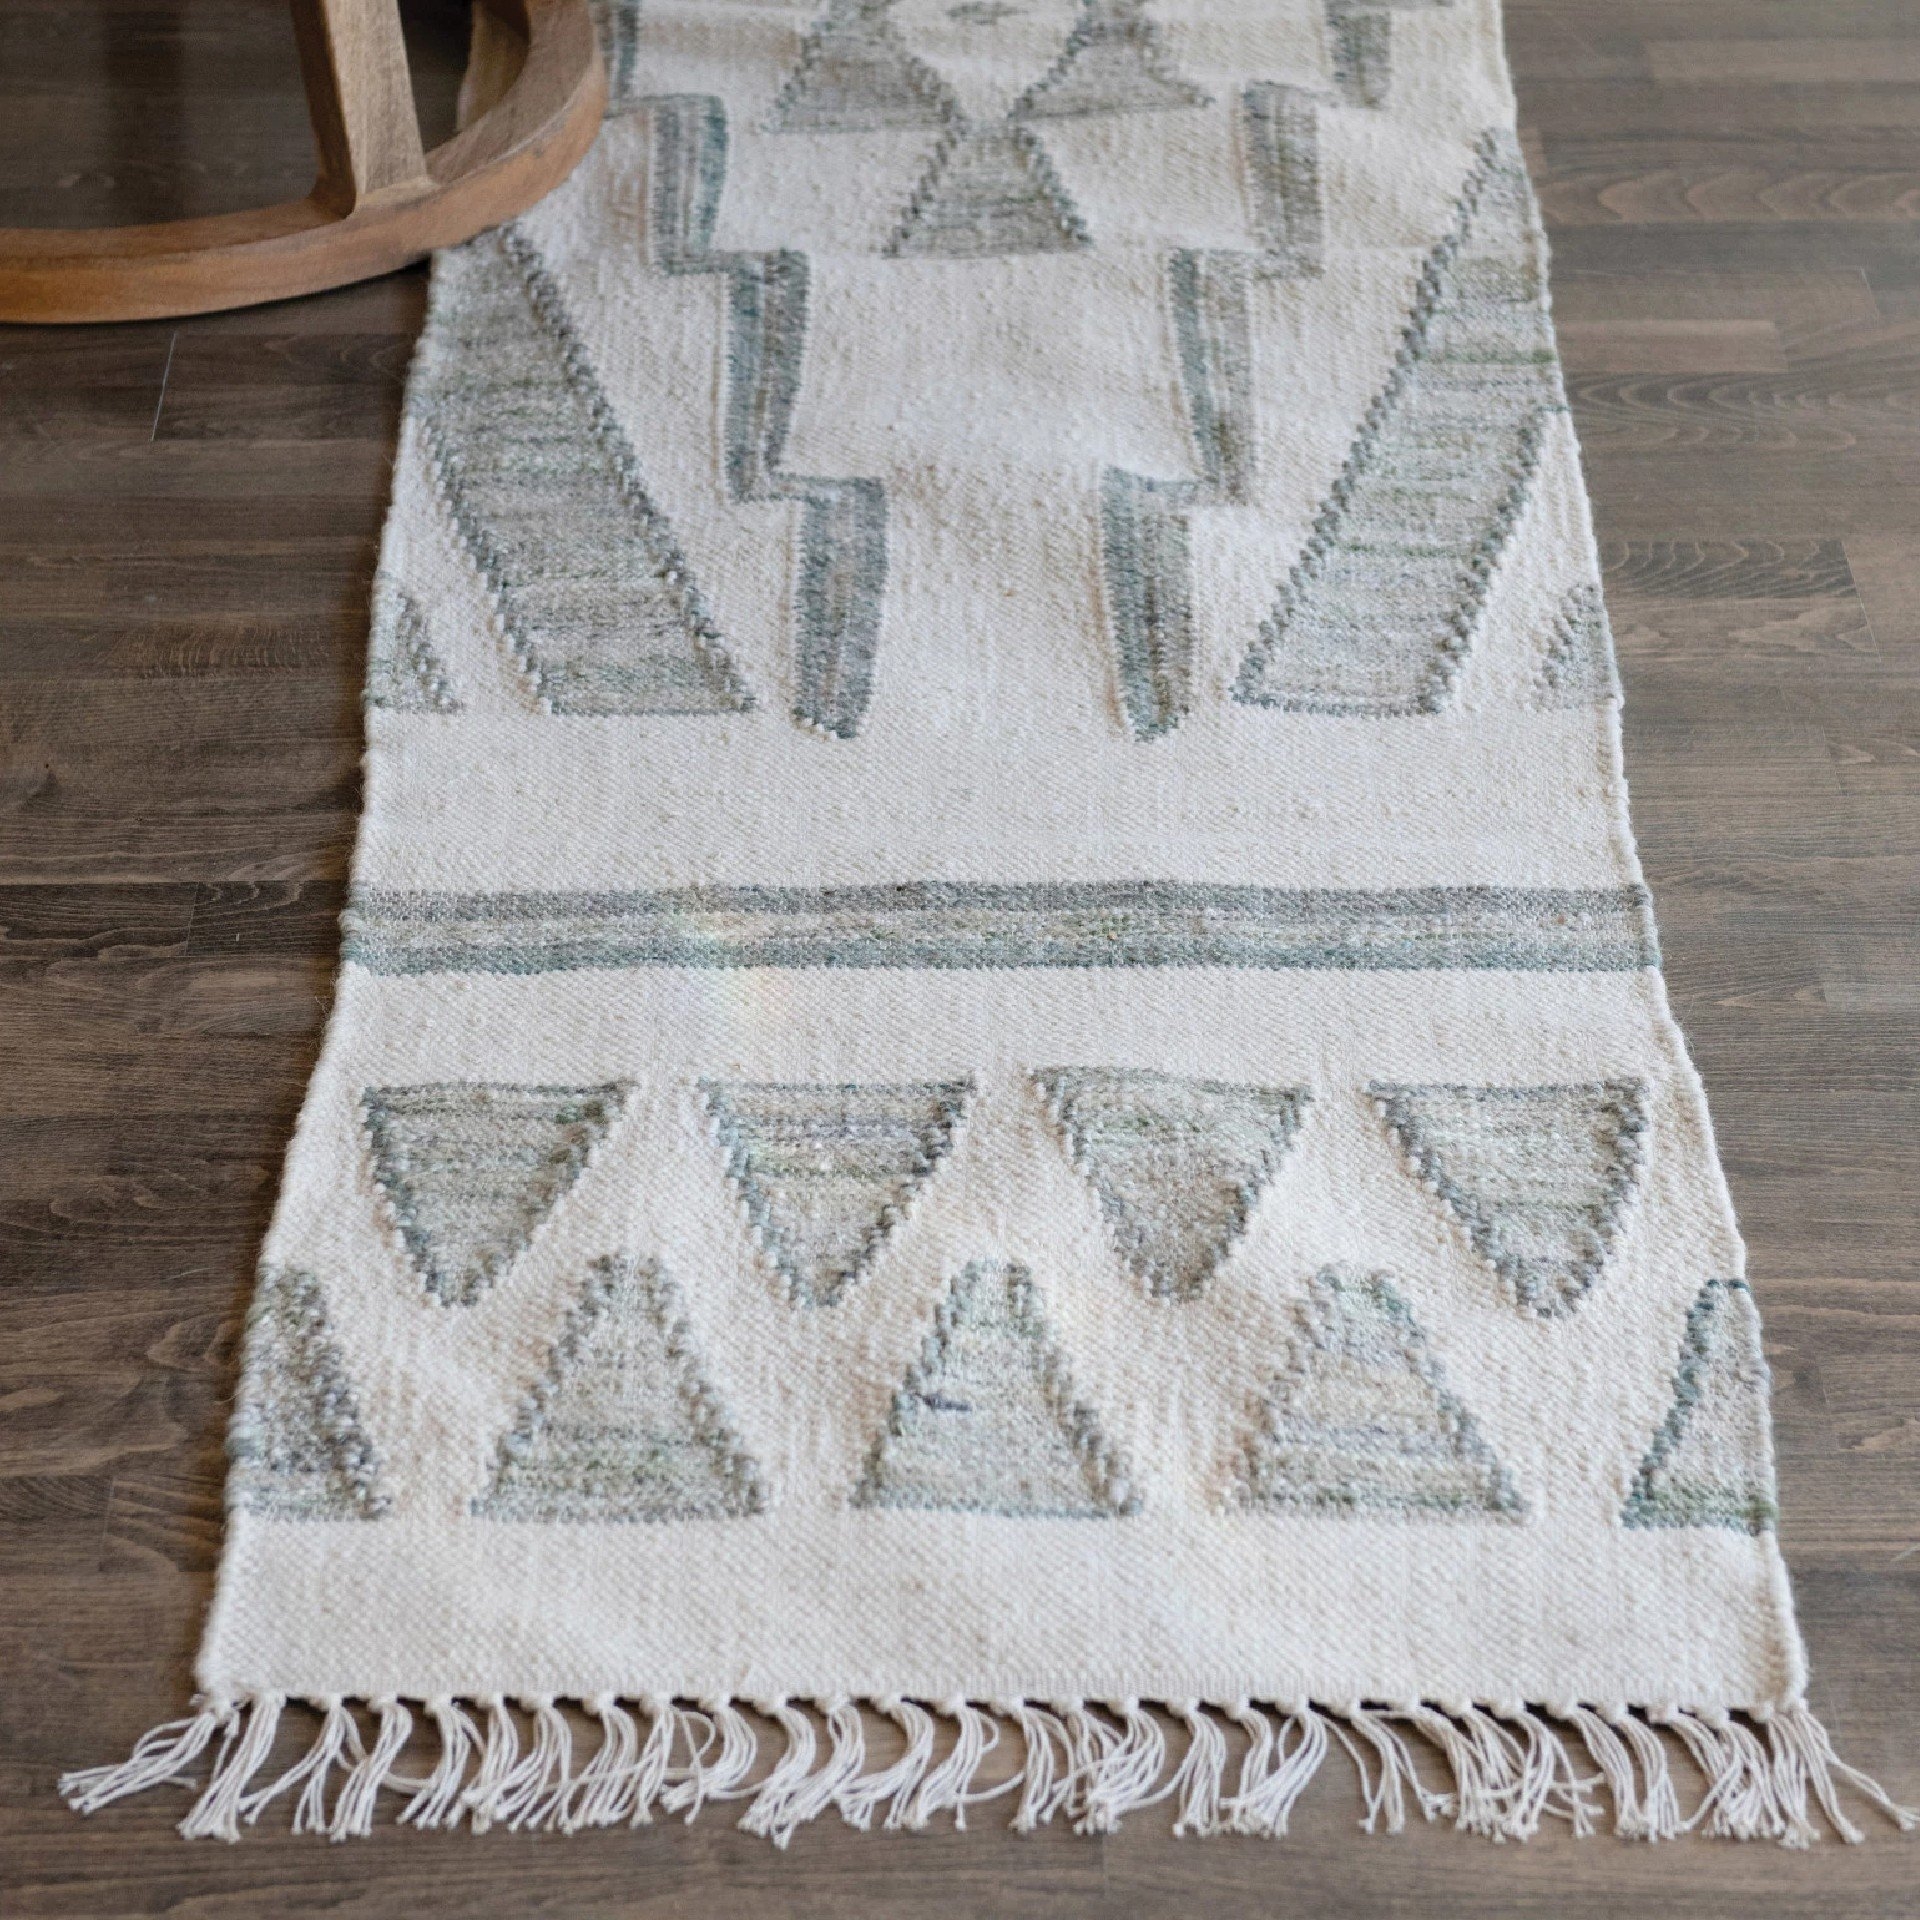 Hand-Woven Cotton & Wool Kilim Floor Runner, Variegated Green & Cream Color - Image 1